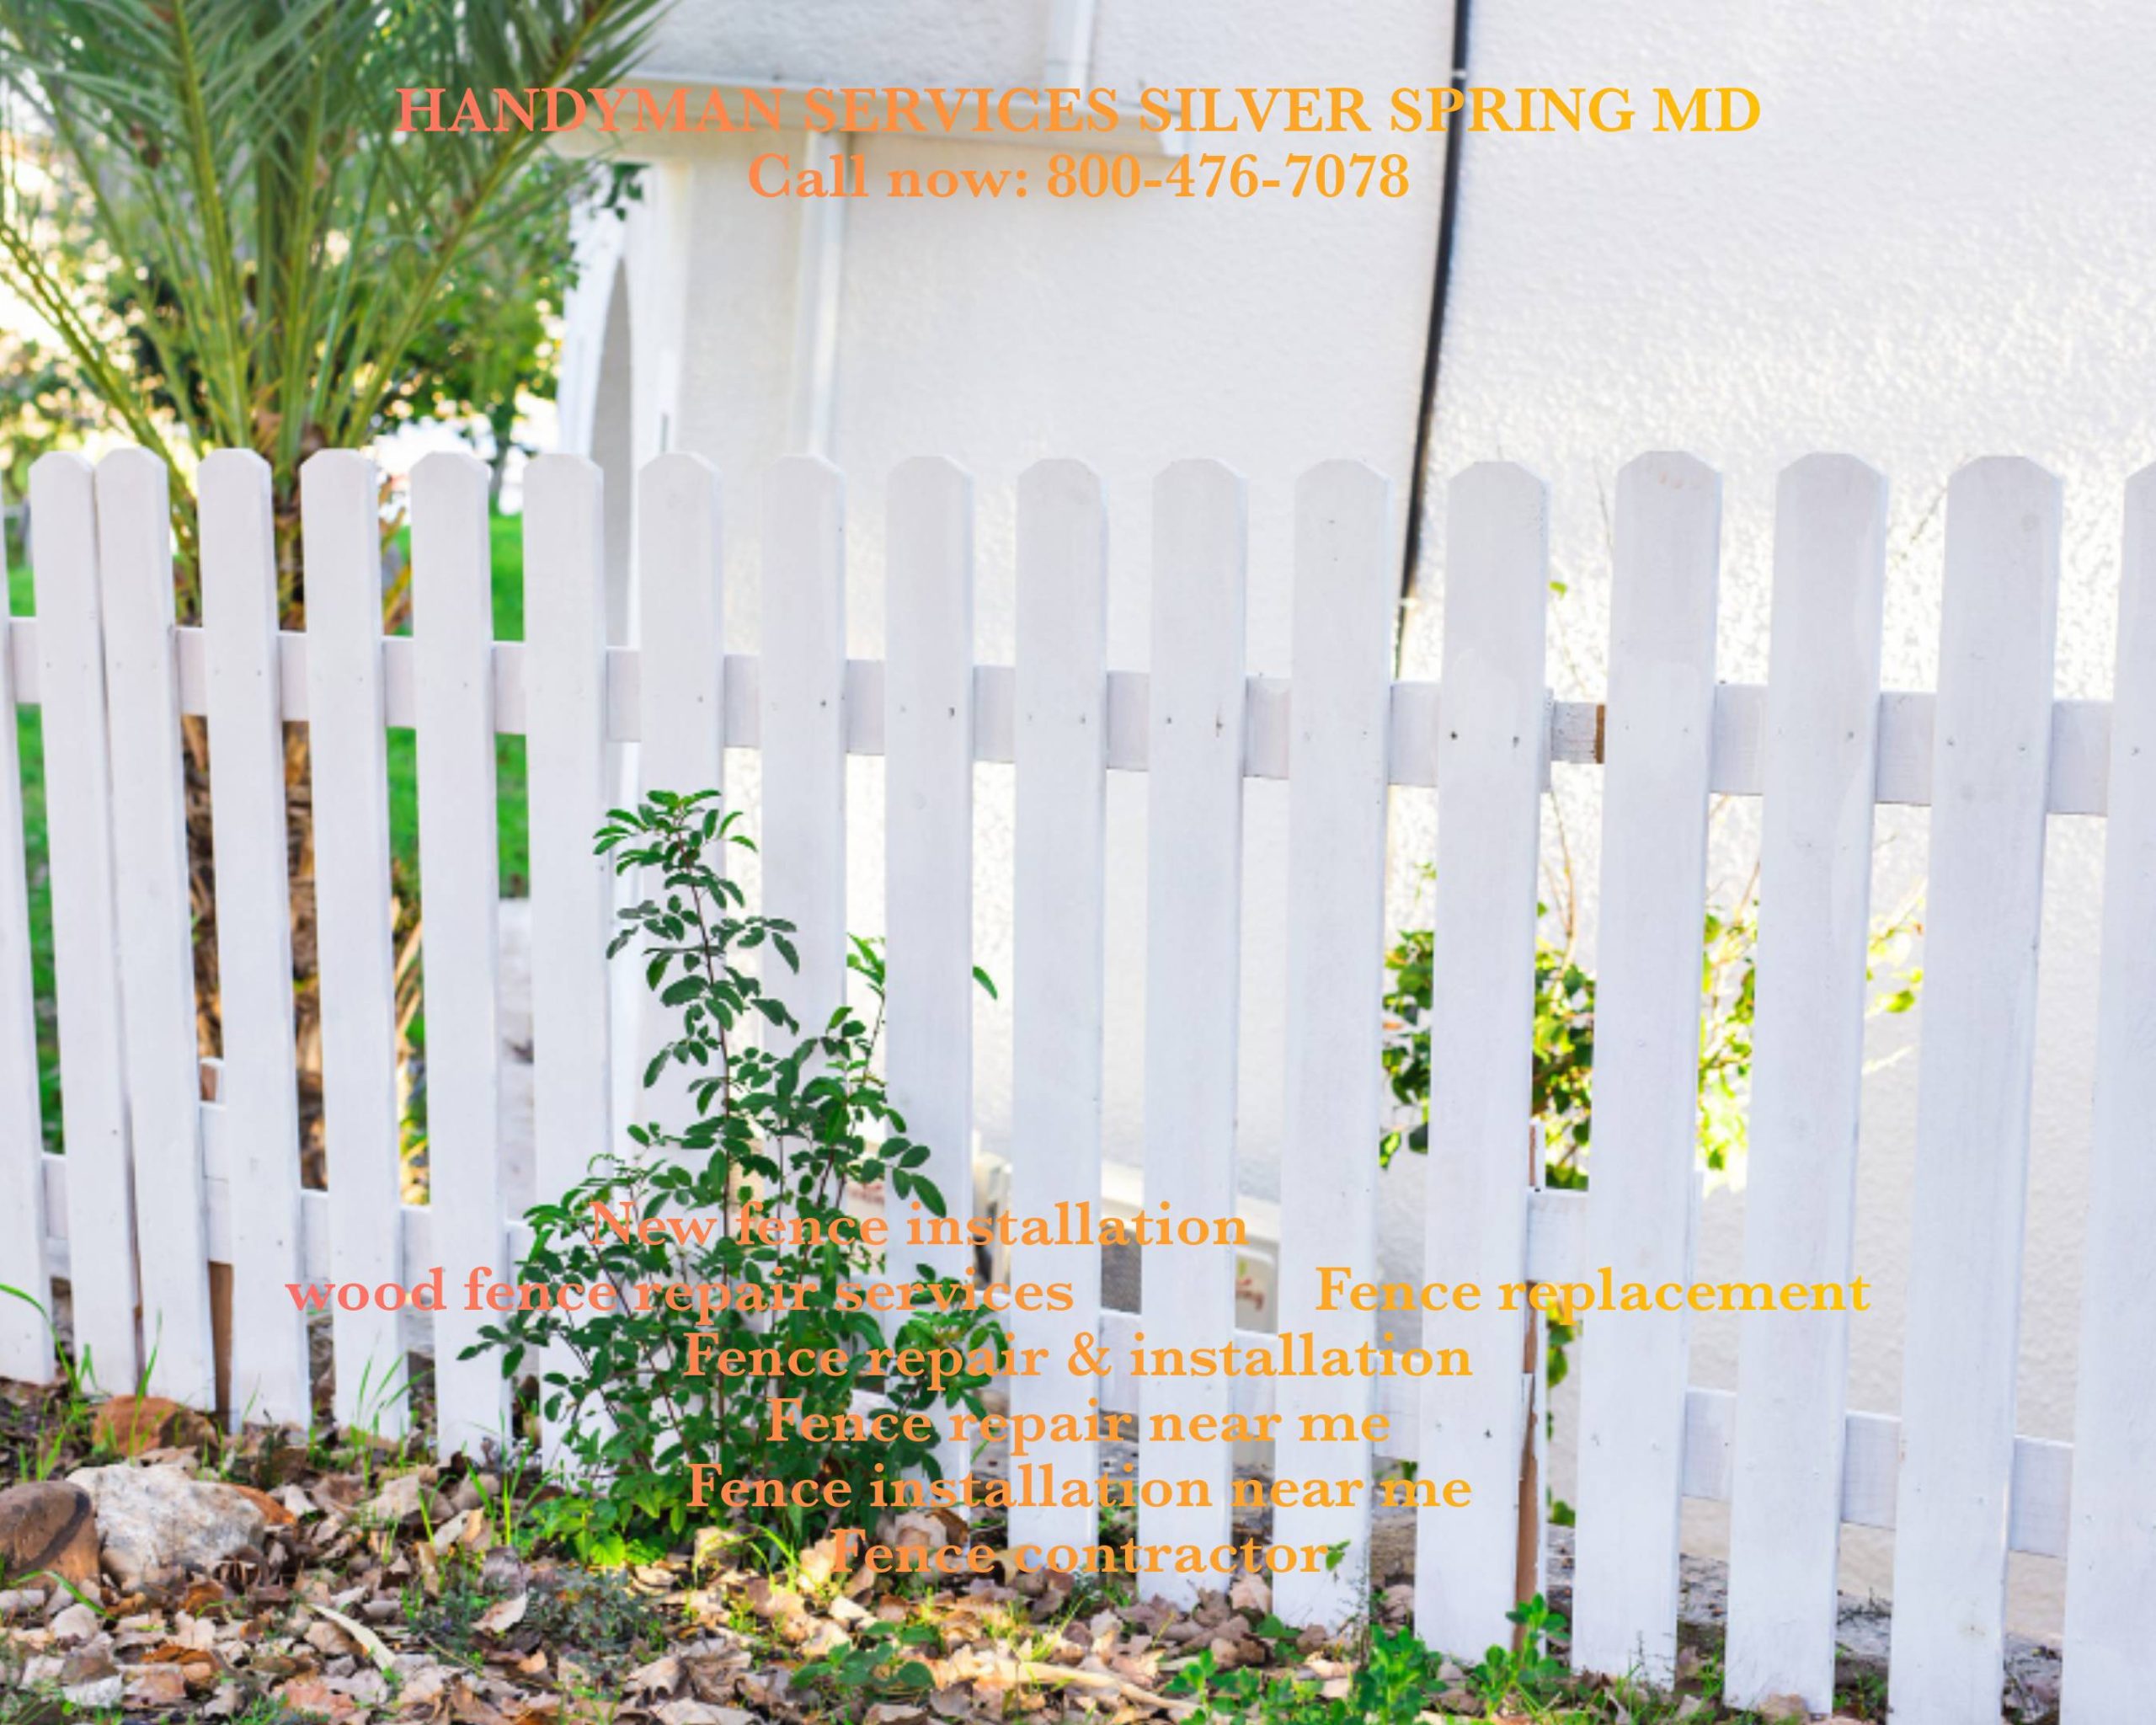 Enhance Your Property’s Aesthetic and Security with Expert Fence Installation and Repair Services